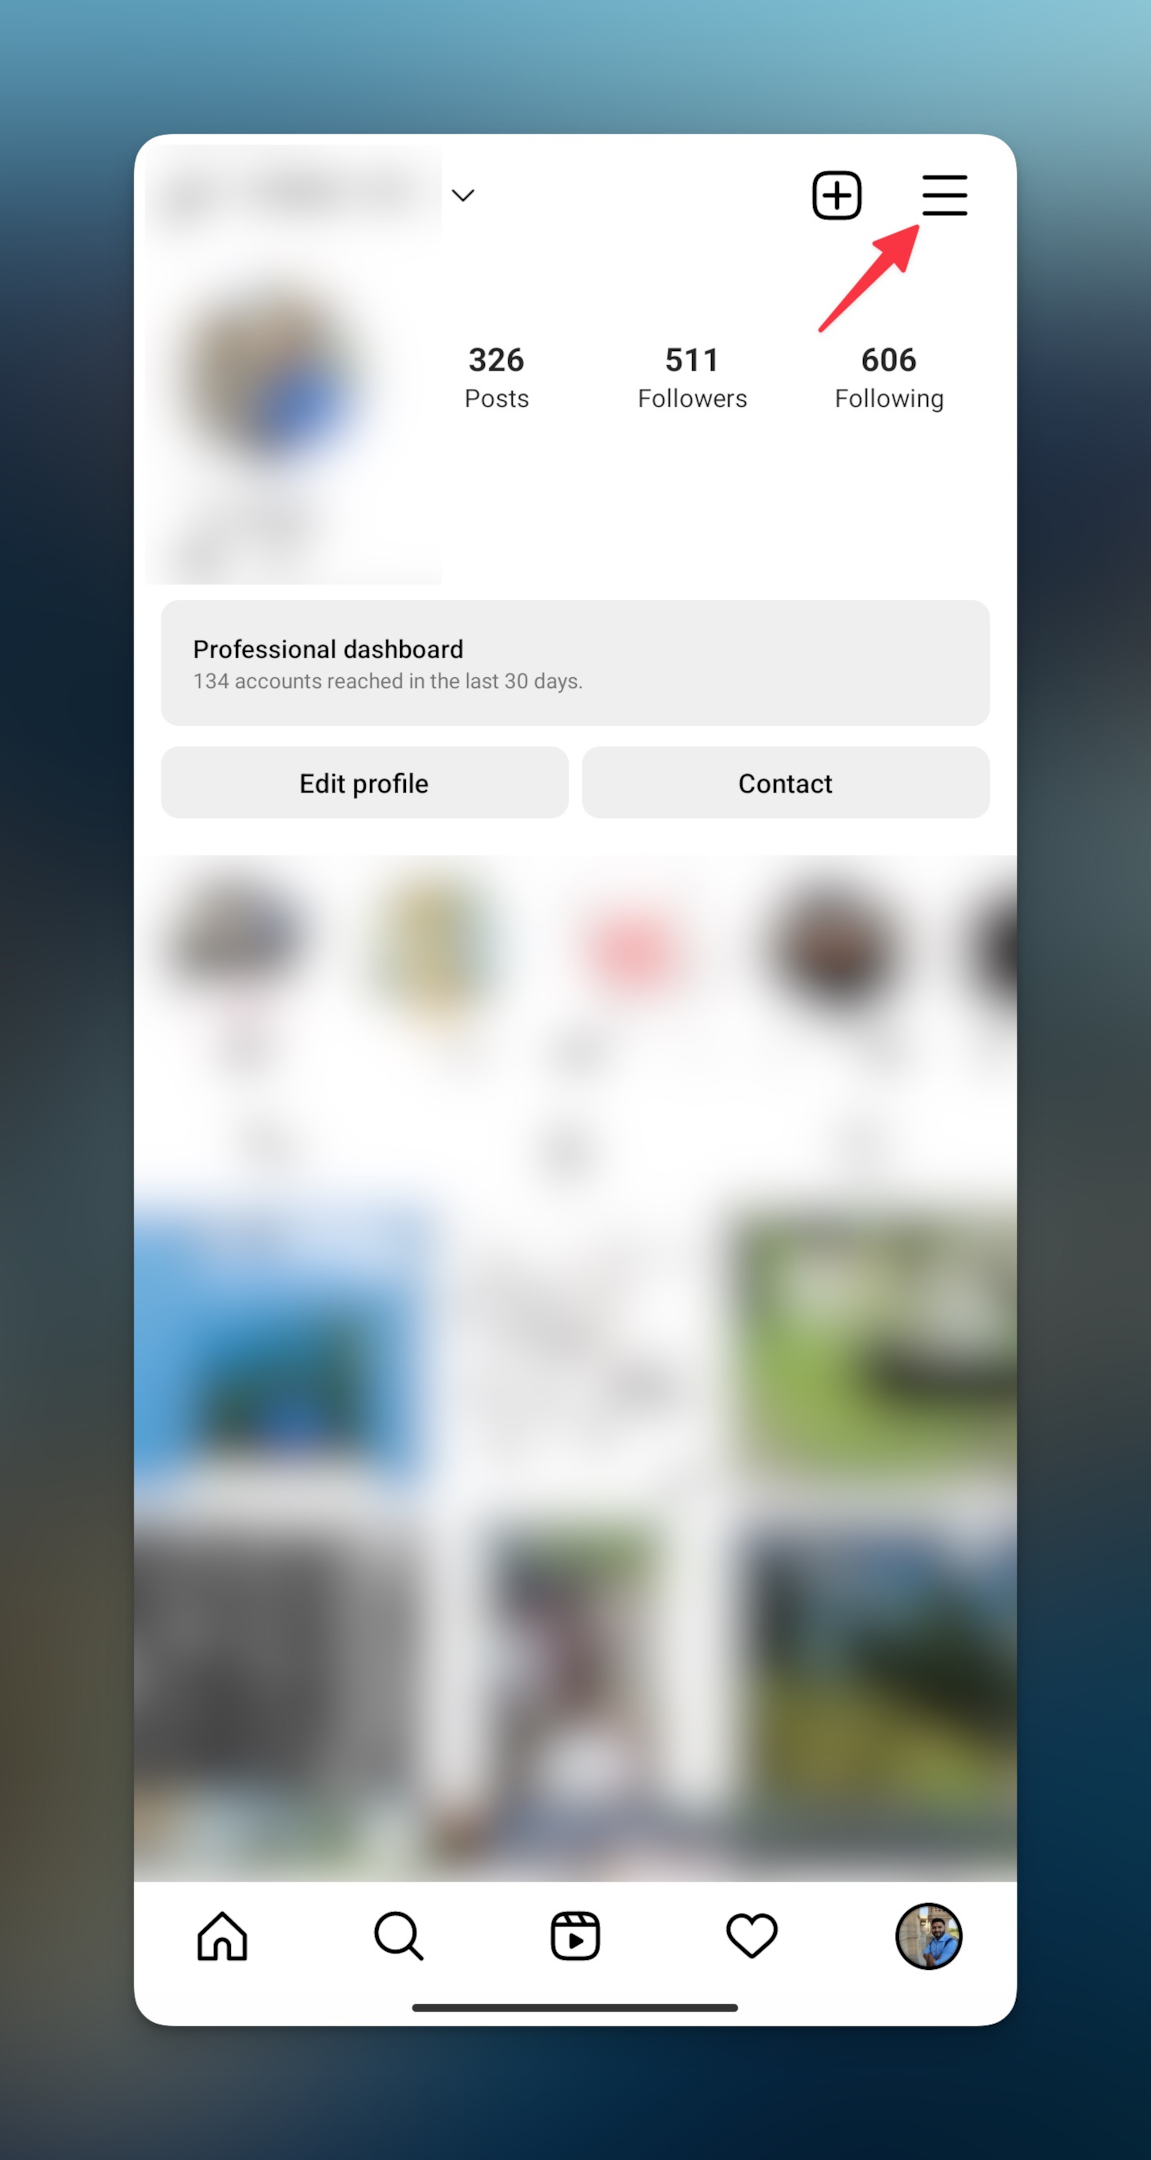 Remote.tools showing a screenshot of an Instagram profile and tap on hamburger menu to switch to private account